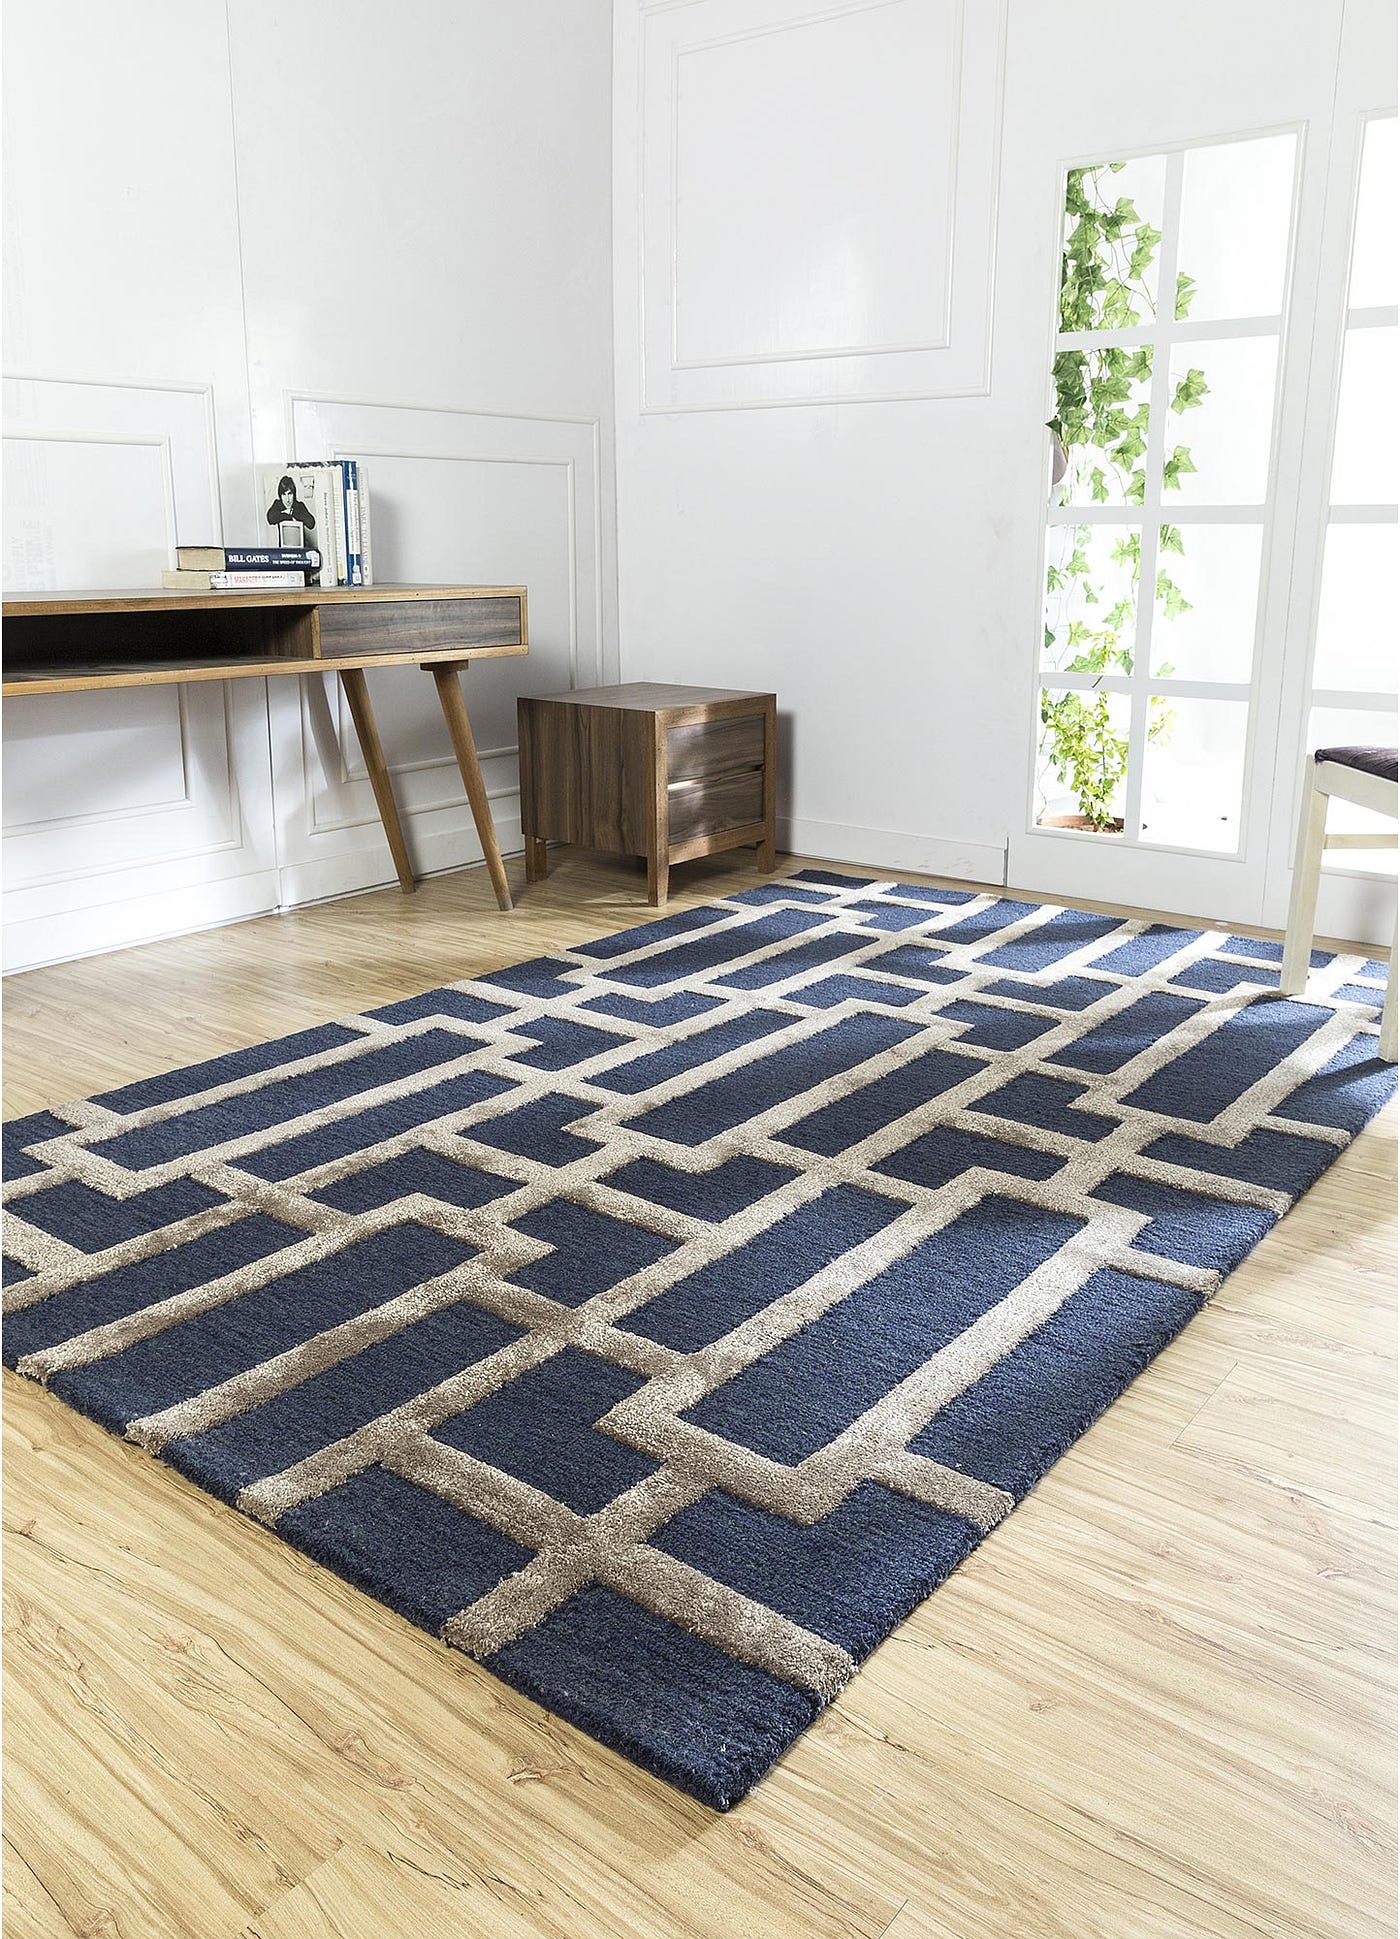 Rug Sizes - A Guide to Area Rug Sizes At Jaipur Rugs Blogs.